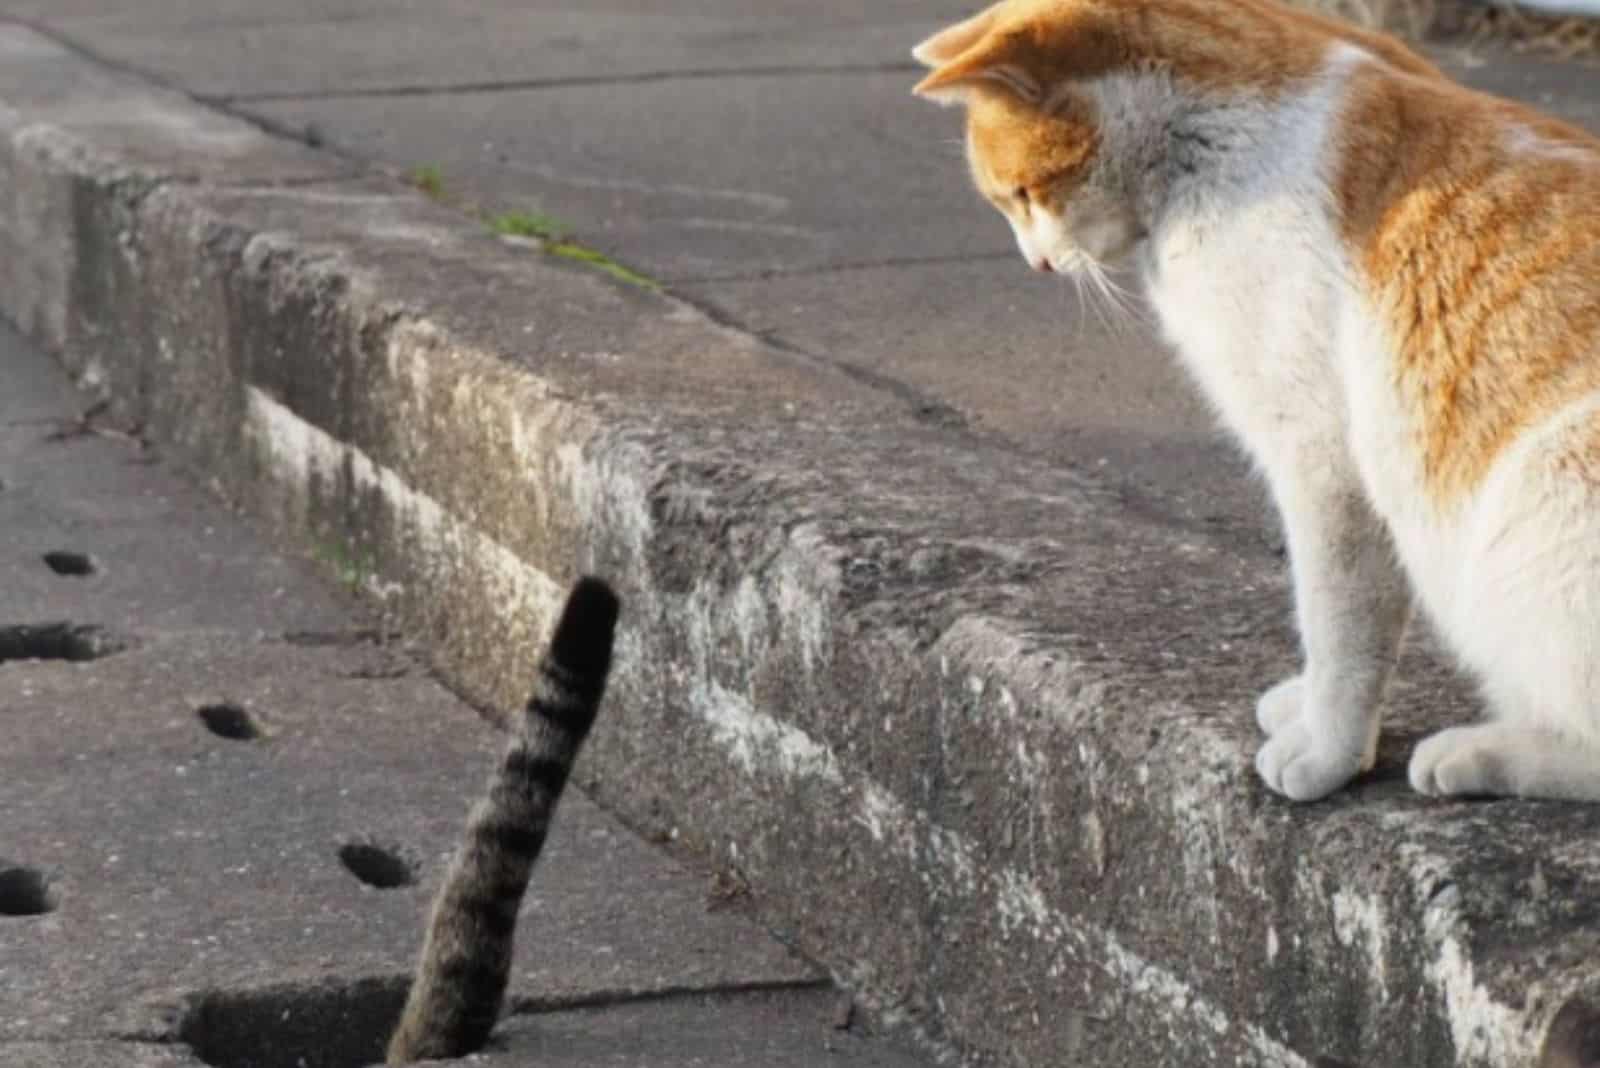 stray cat looking at a tail that is peeking out of a hole